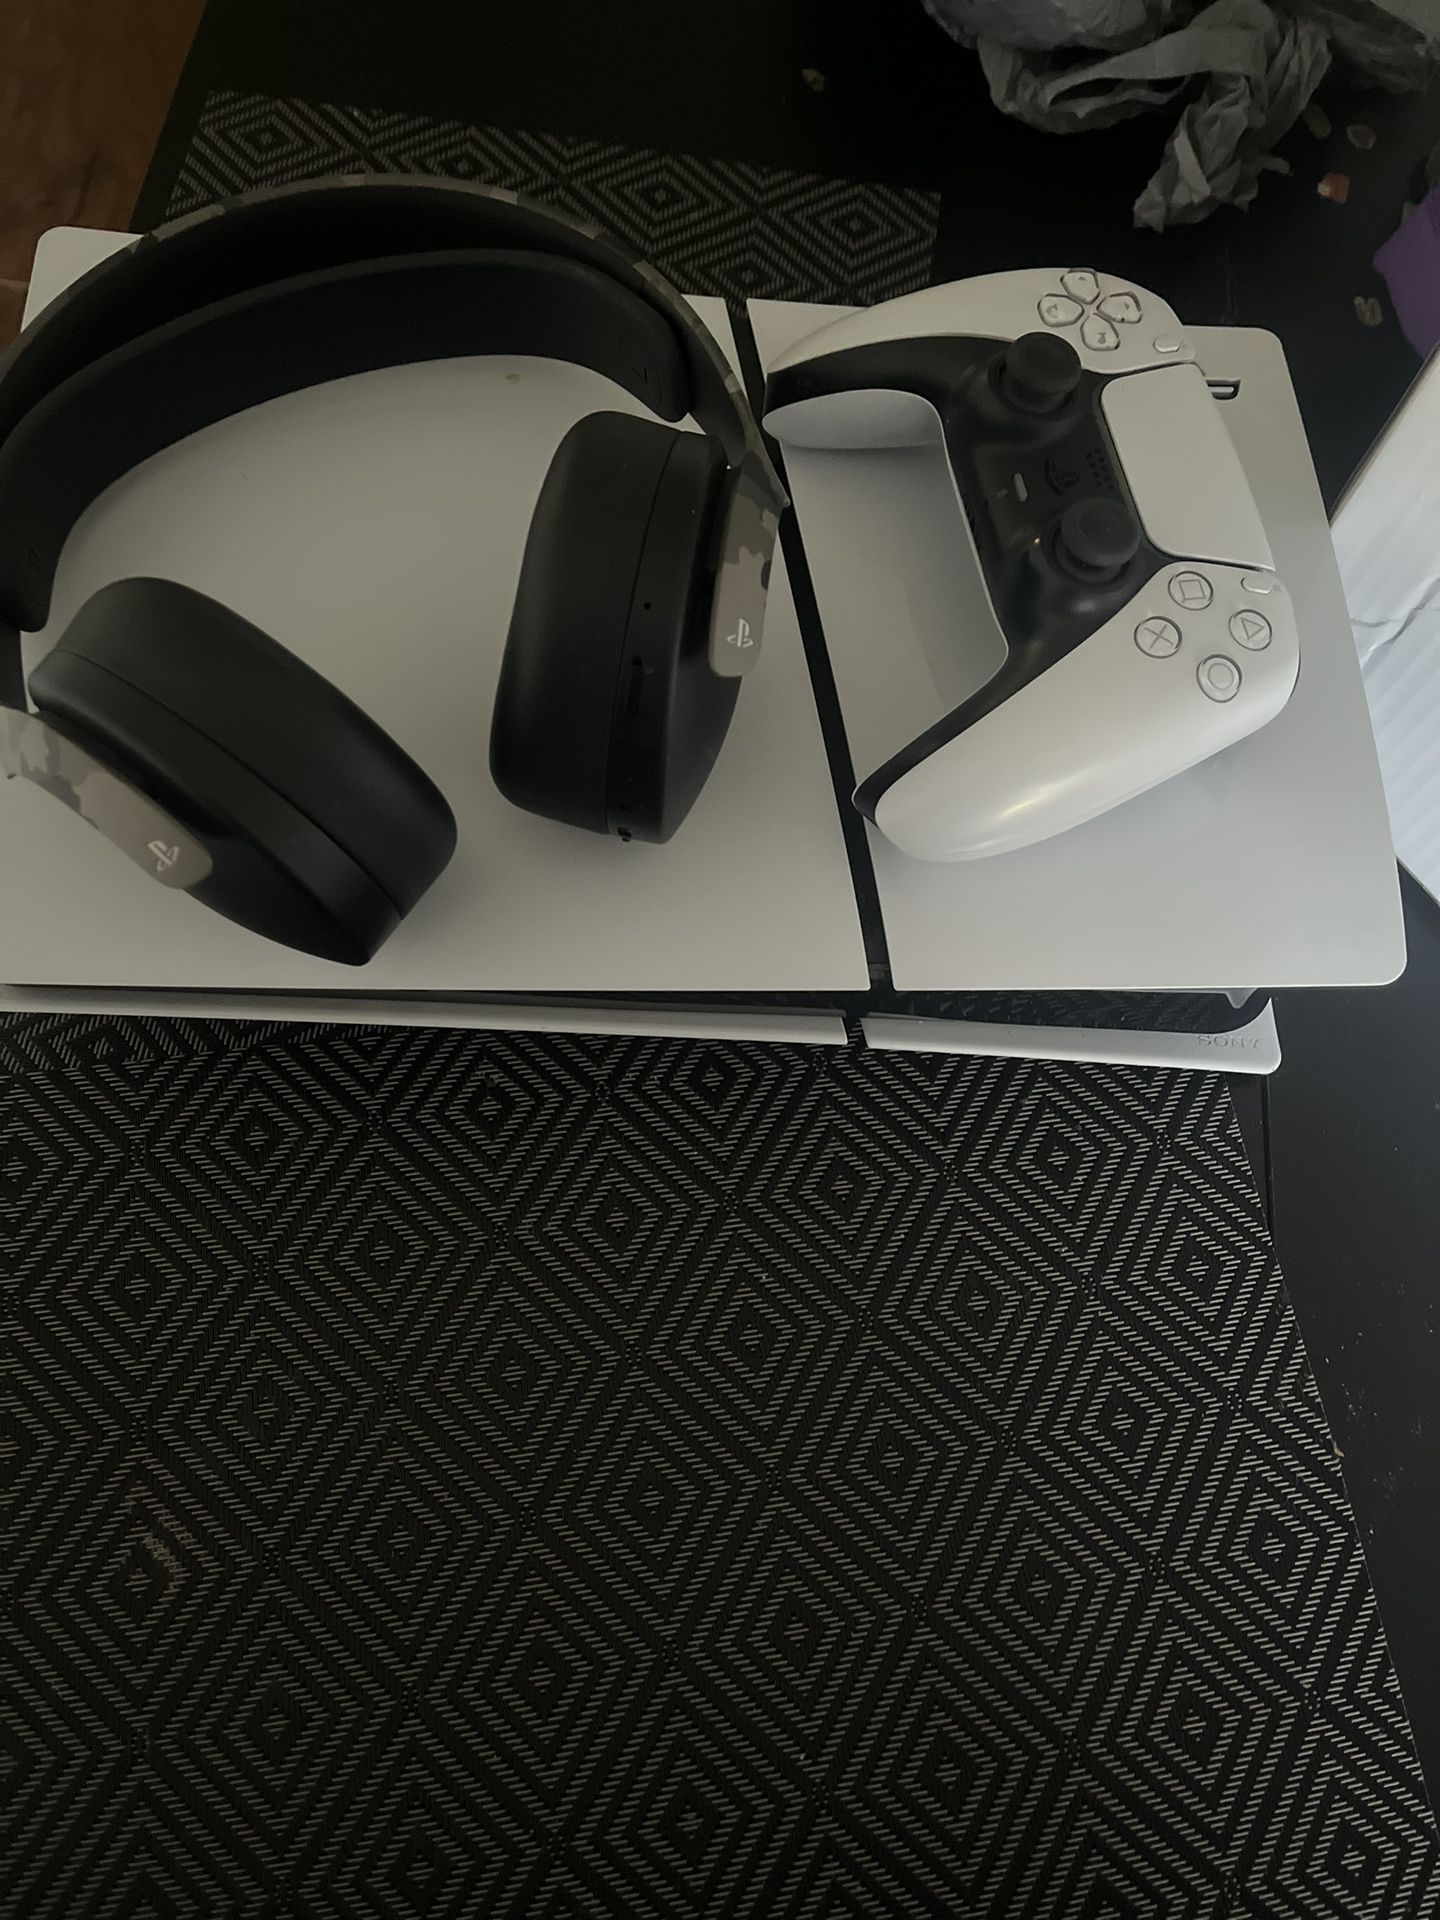 Ps5 And Headset